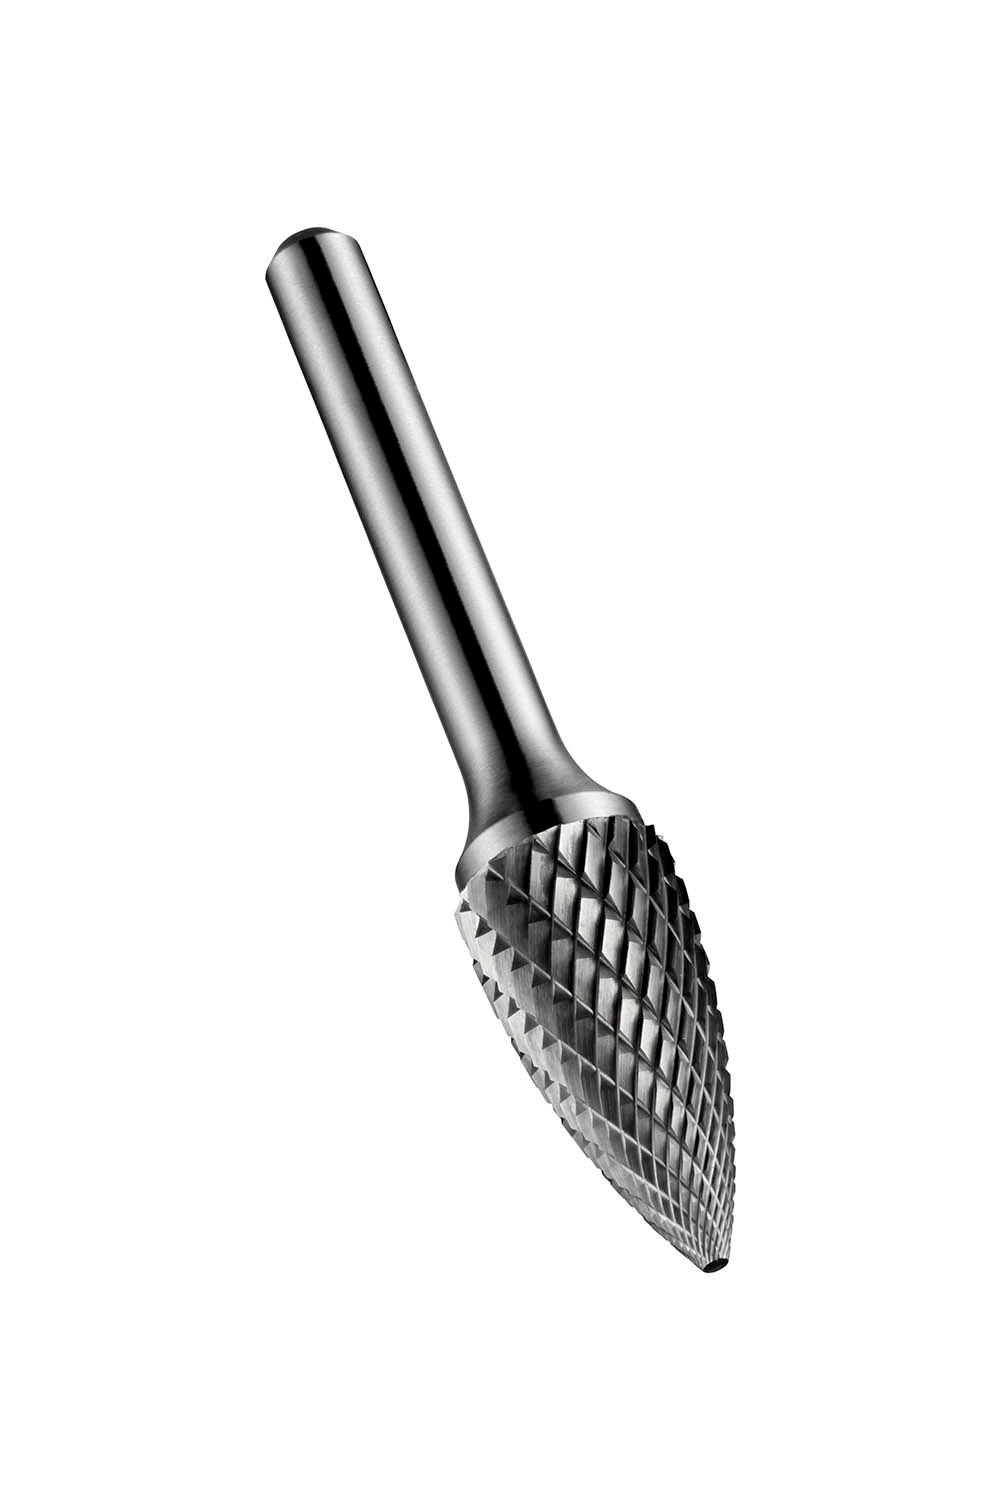 Dormer - P813 Solid Carbide Burr Bright Pointed Tree 8.00mm x 6.00mm